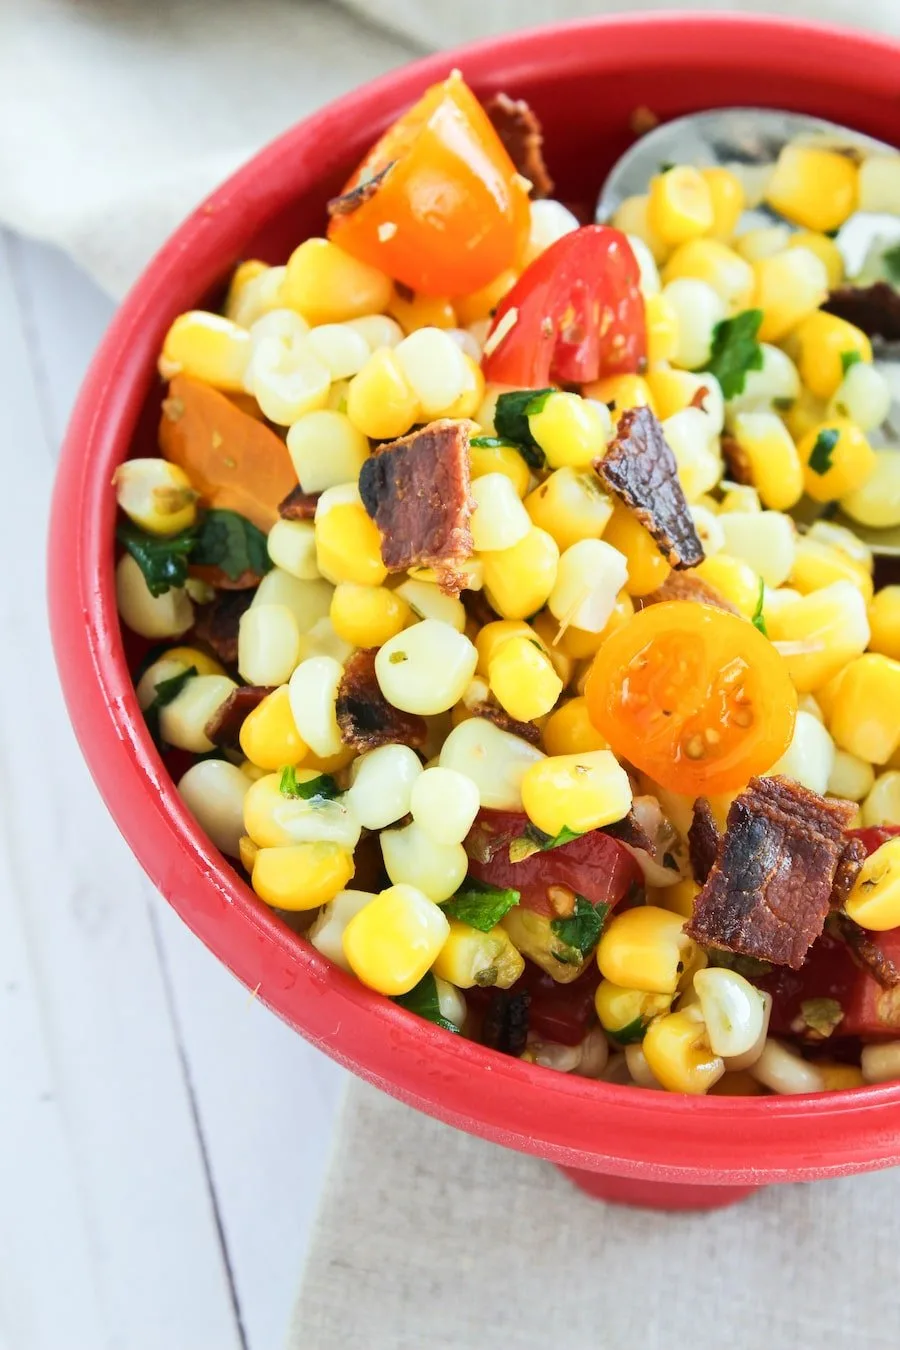 Looking for a new way to serve up some vegetable side dishes? This delicious corn salad with bacon is quick, easy, and delicious. The whole family will love this easy vegetable salad. It's a great picnic recipe as well. 